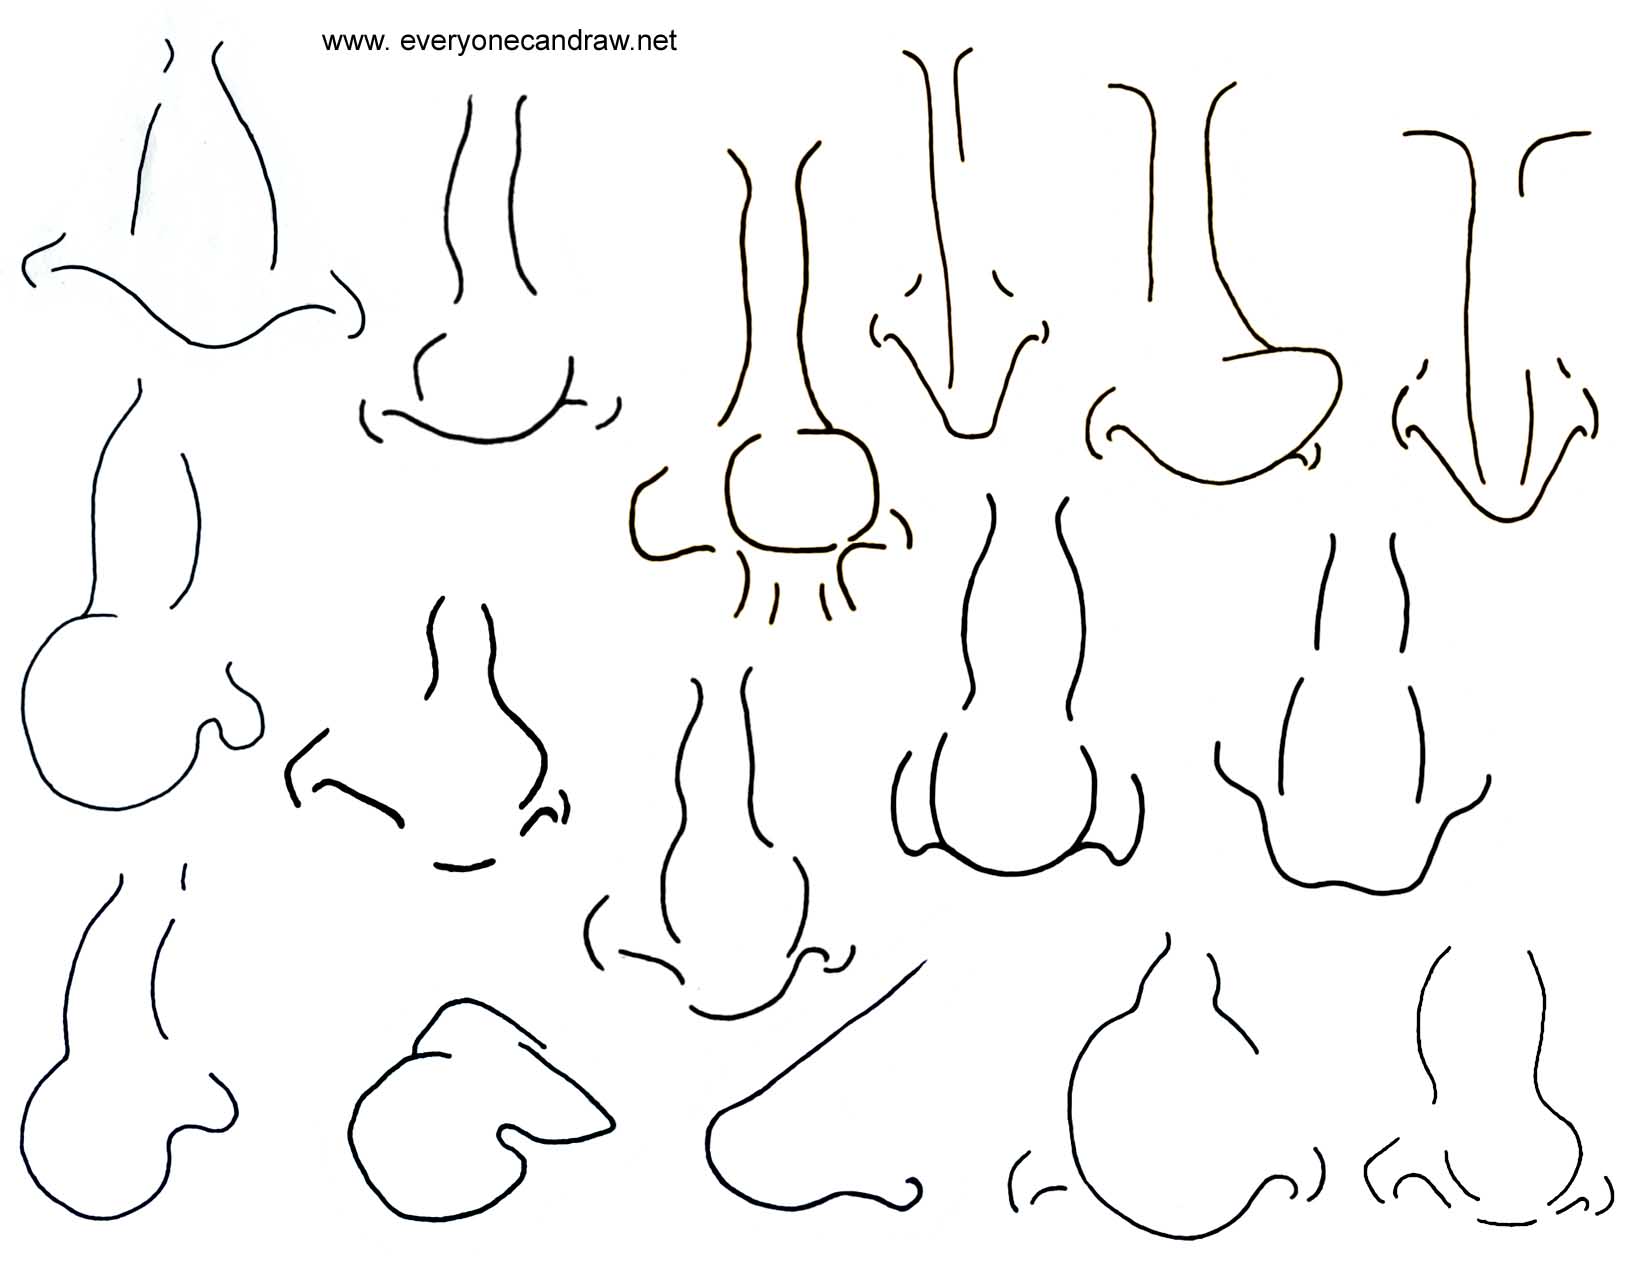 How to Draw Cartoon Noses.